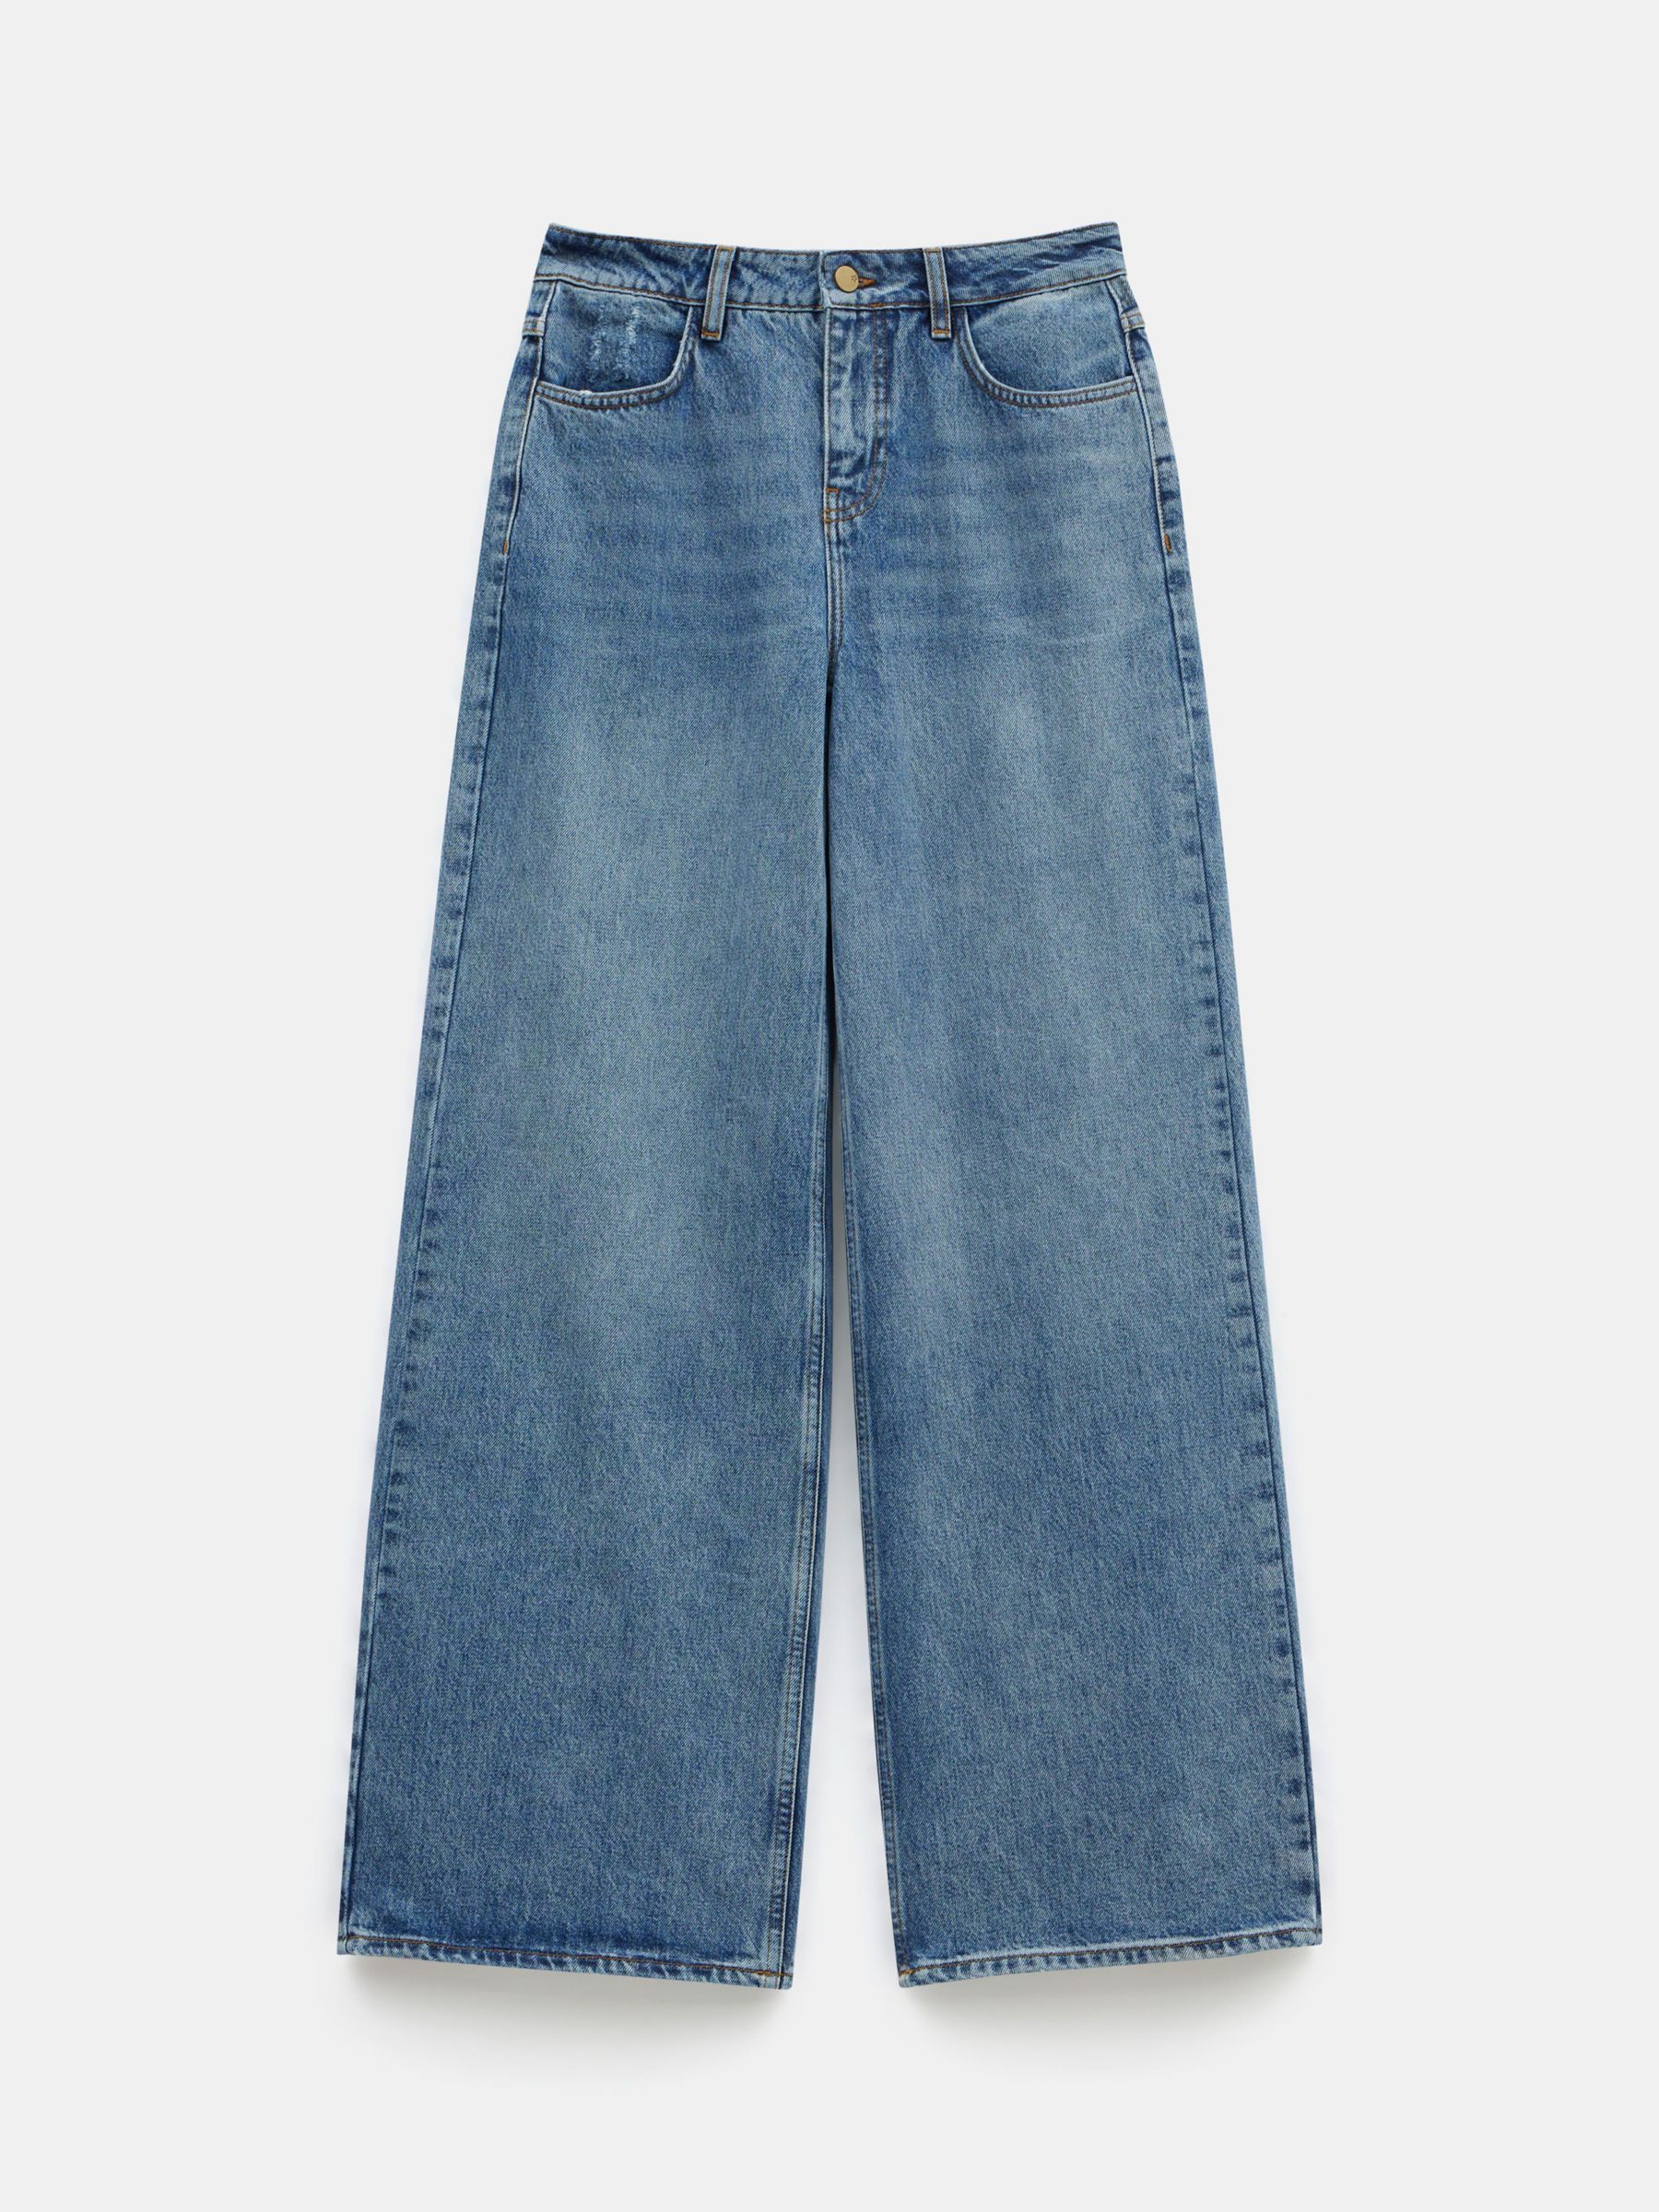 HUSH Abi Wide Leg Jeans, Mid Authentic at John Lewis & Partners